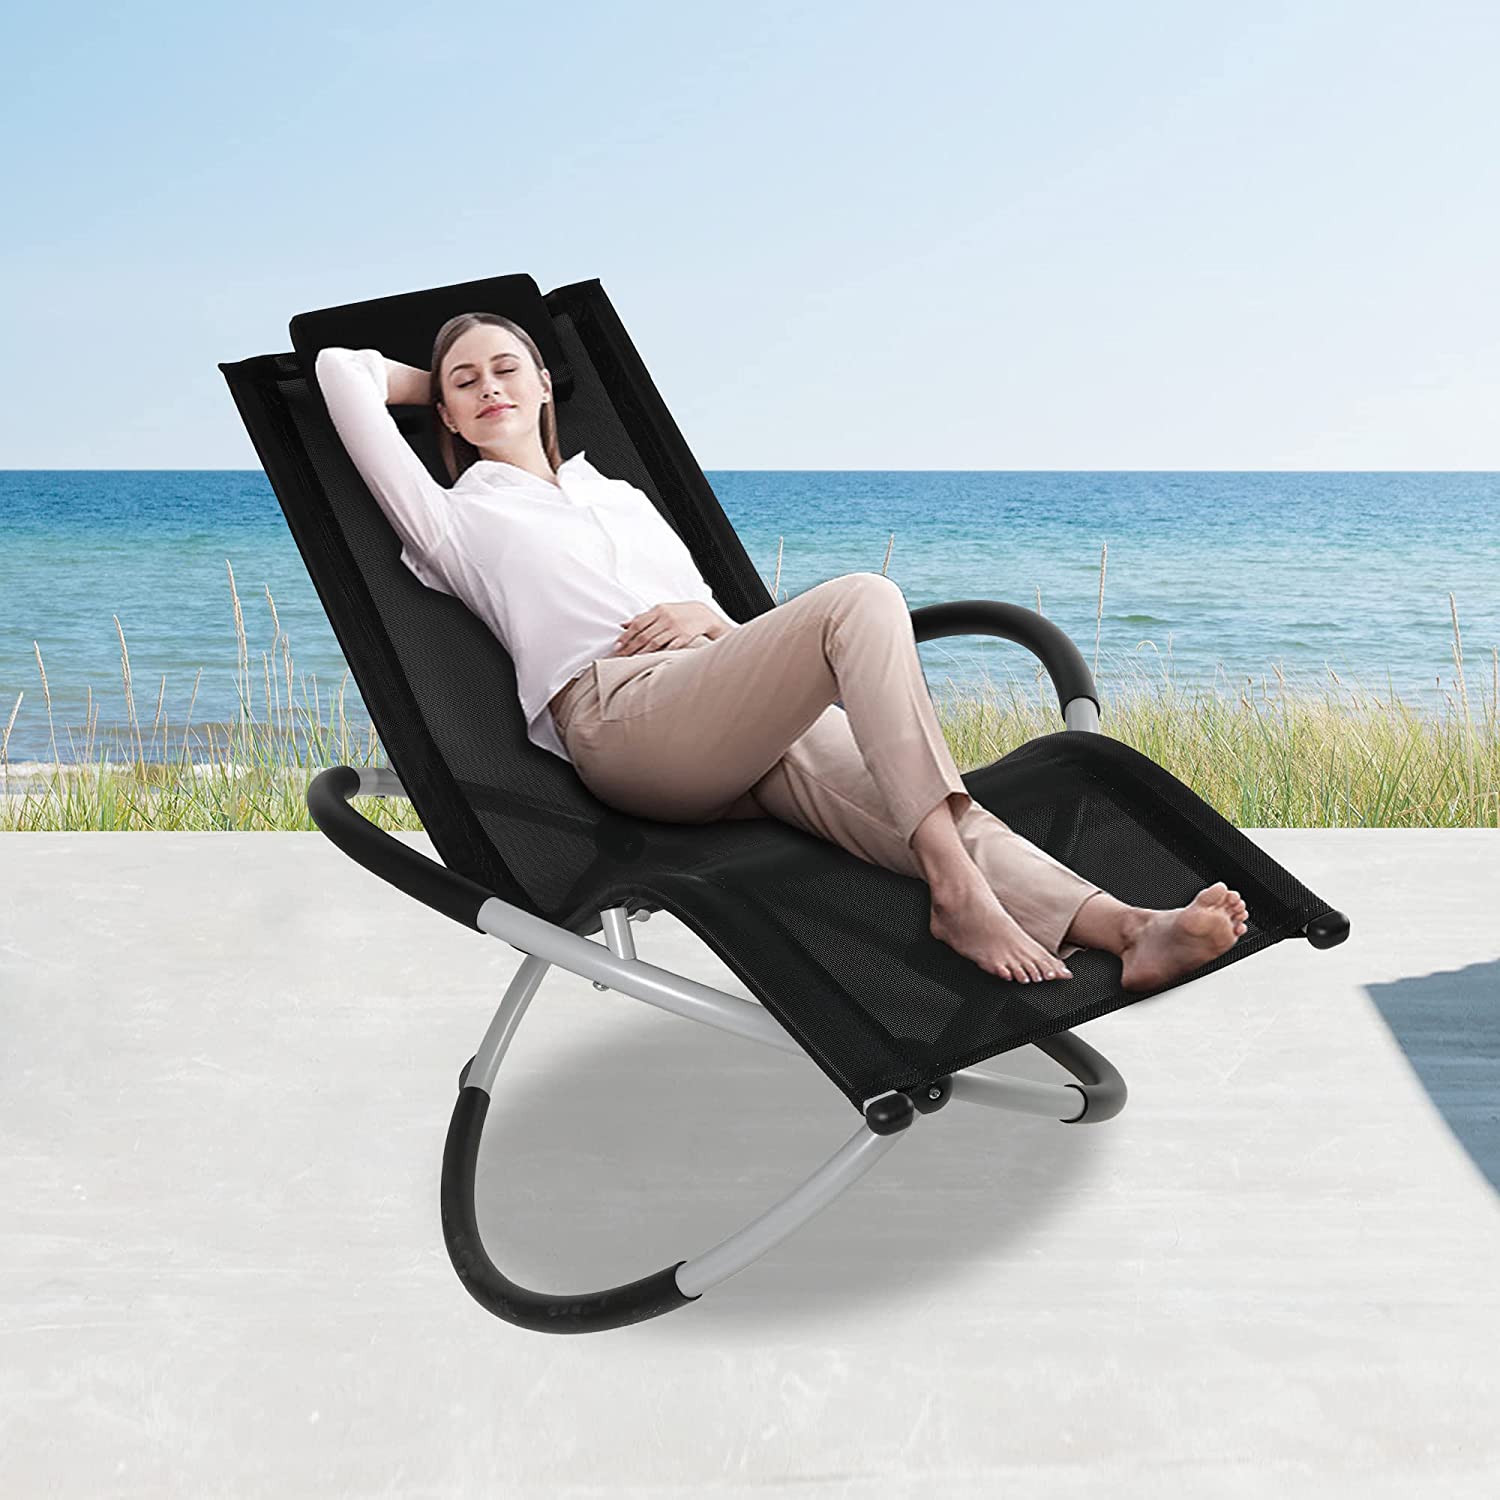 Patio Rocking Lounge Chair, Foldable Rocking Chair Sun Lounger with Headrest Pillow